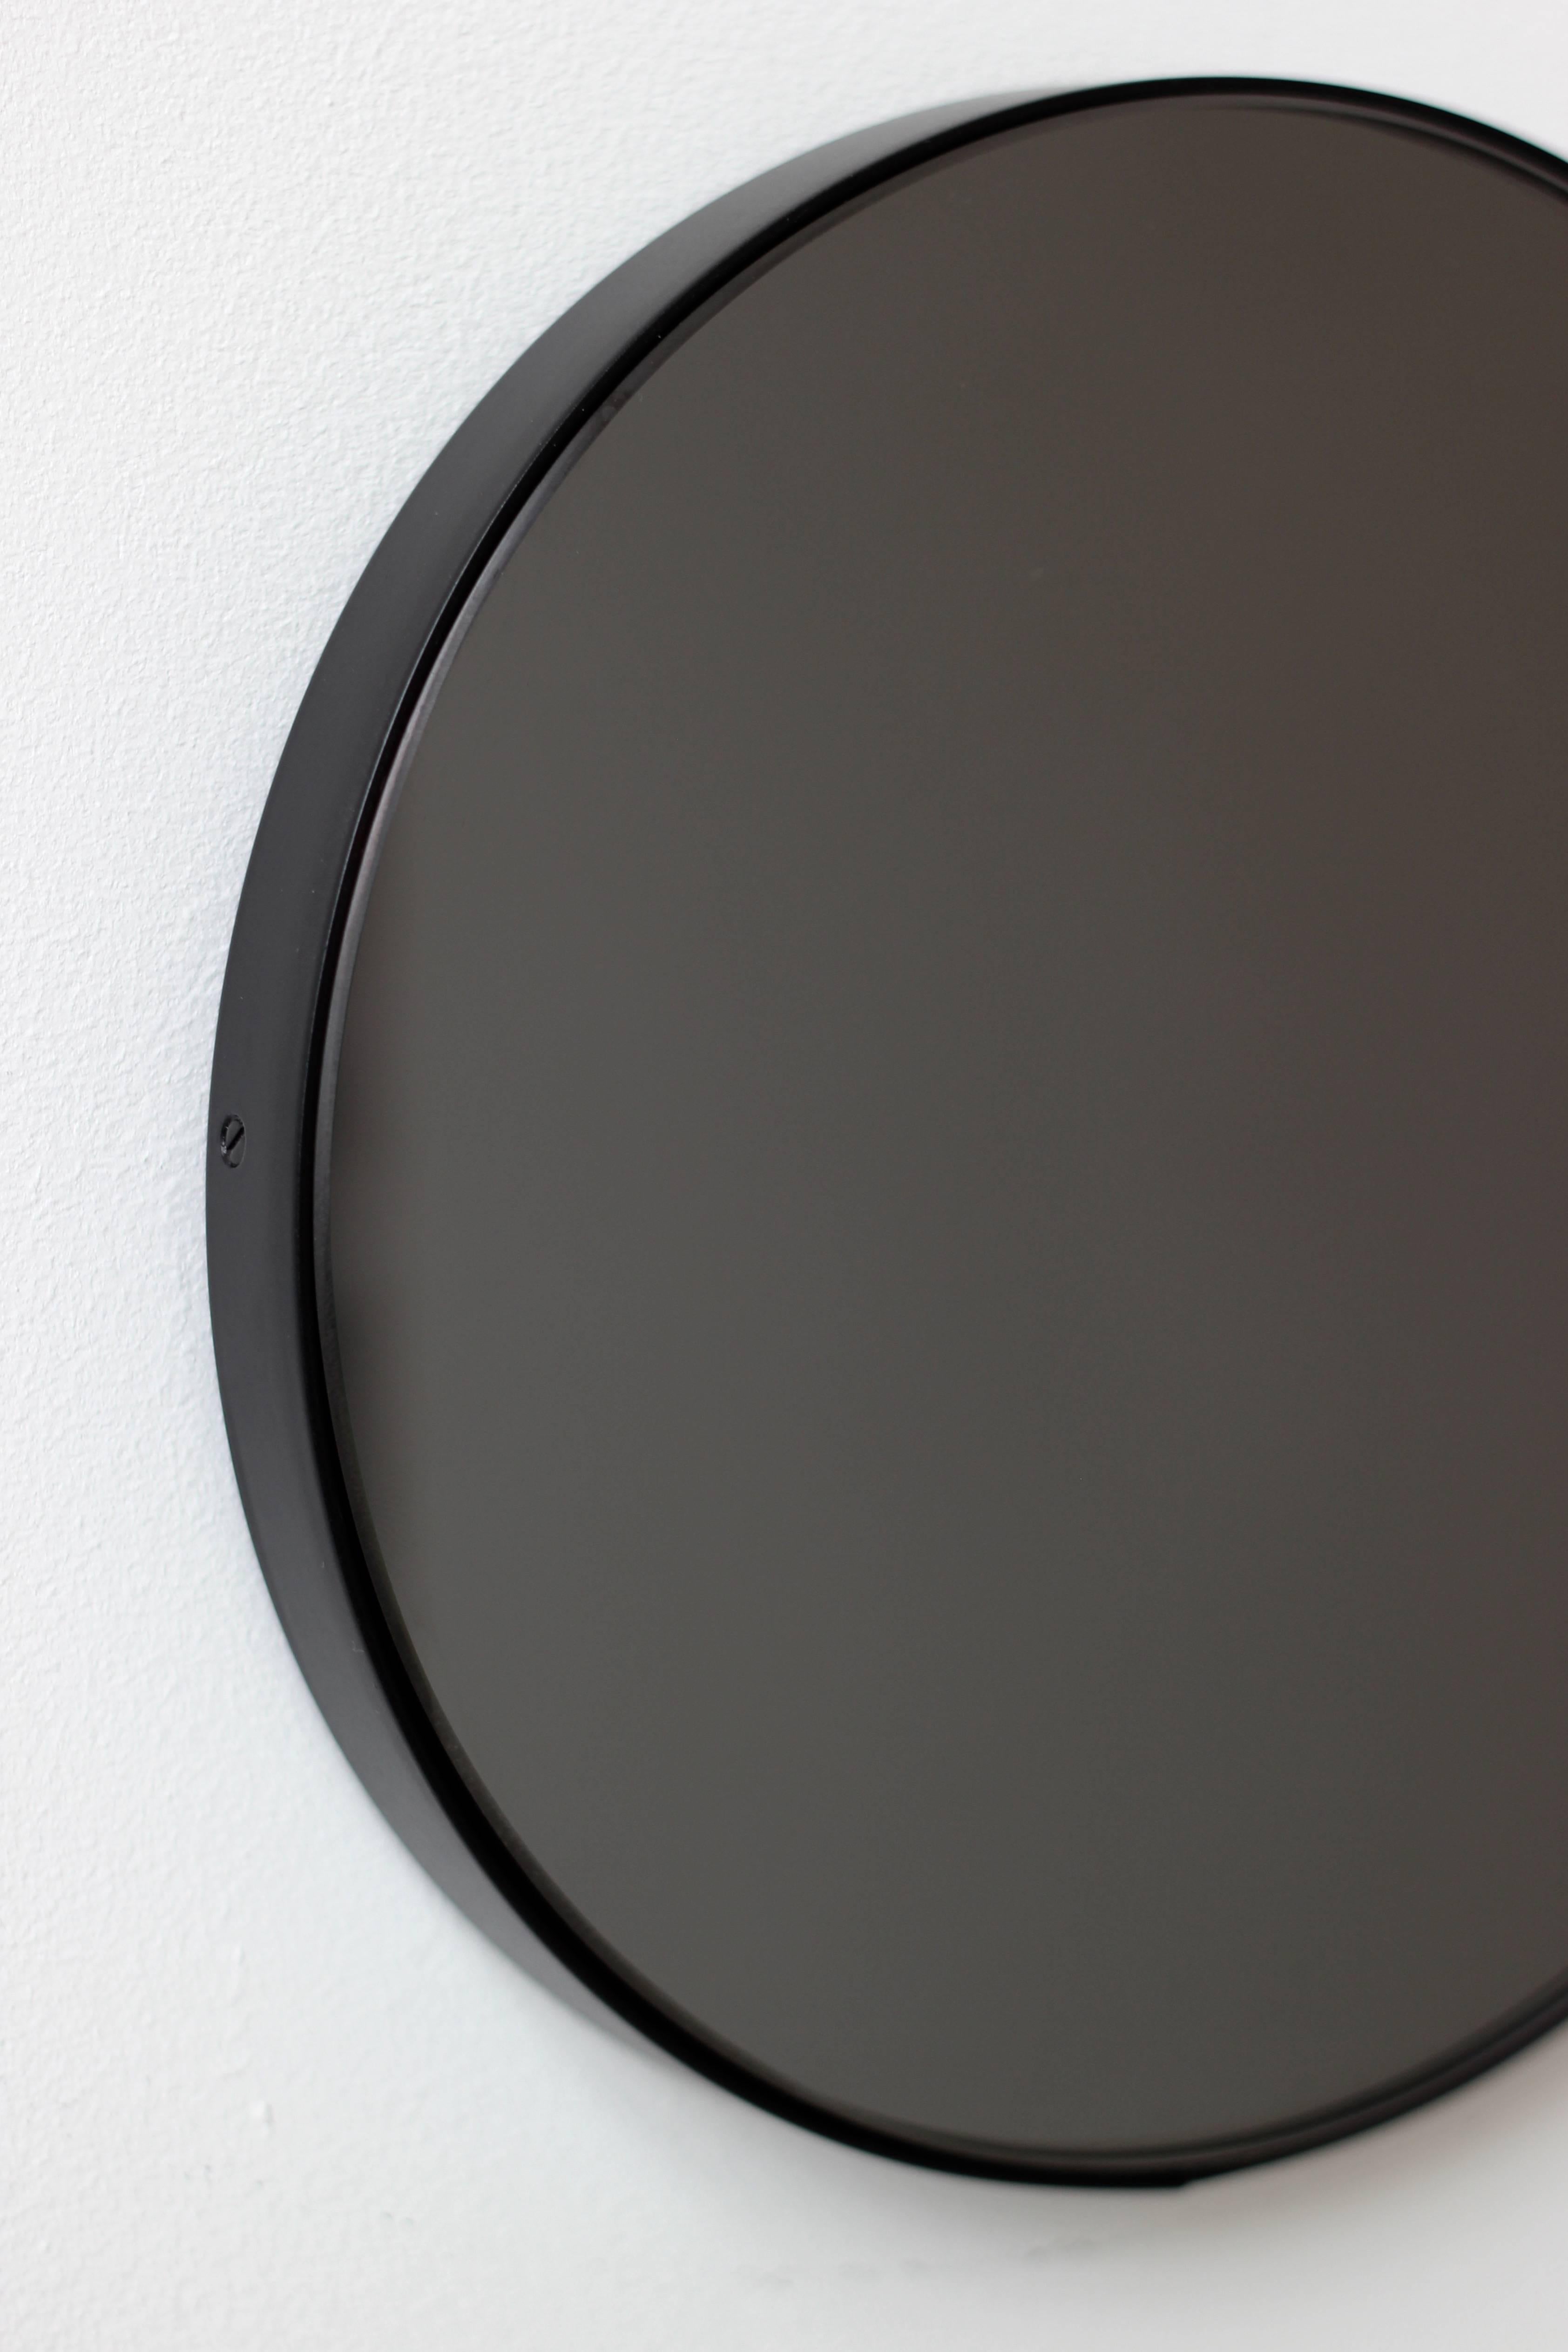 Powder-Coated Orbis Black Tinted Modern Art Deco Round Mirror with Black Frame, XL For Sale